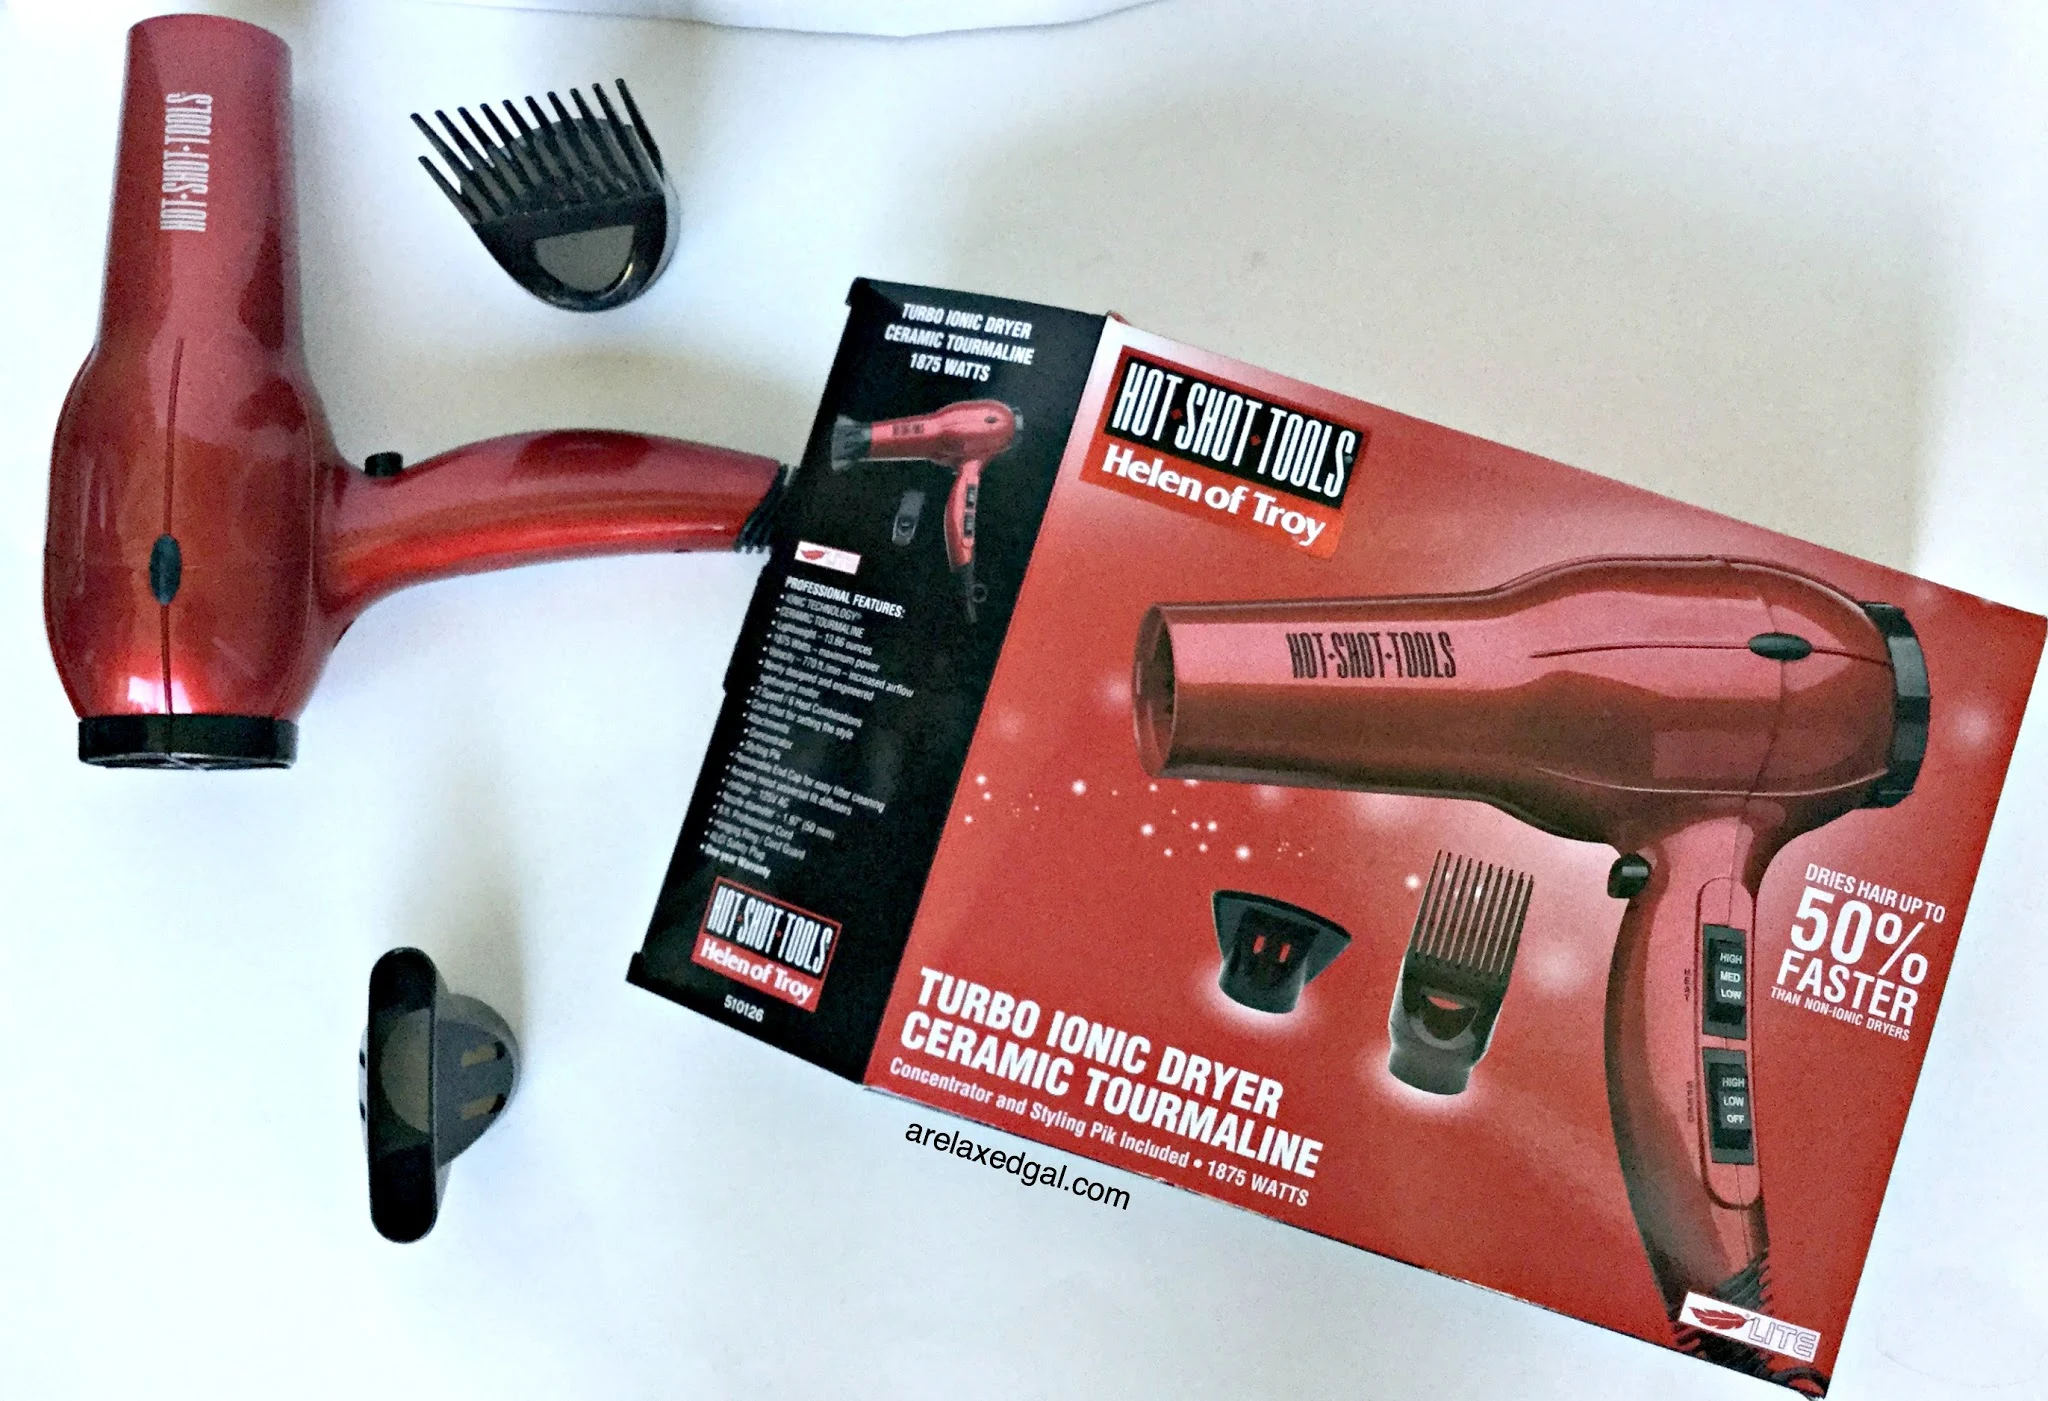 What to look for in a good blow dryer | A Relaxed Gal